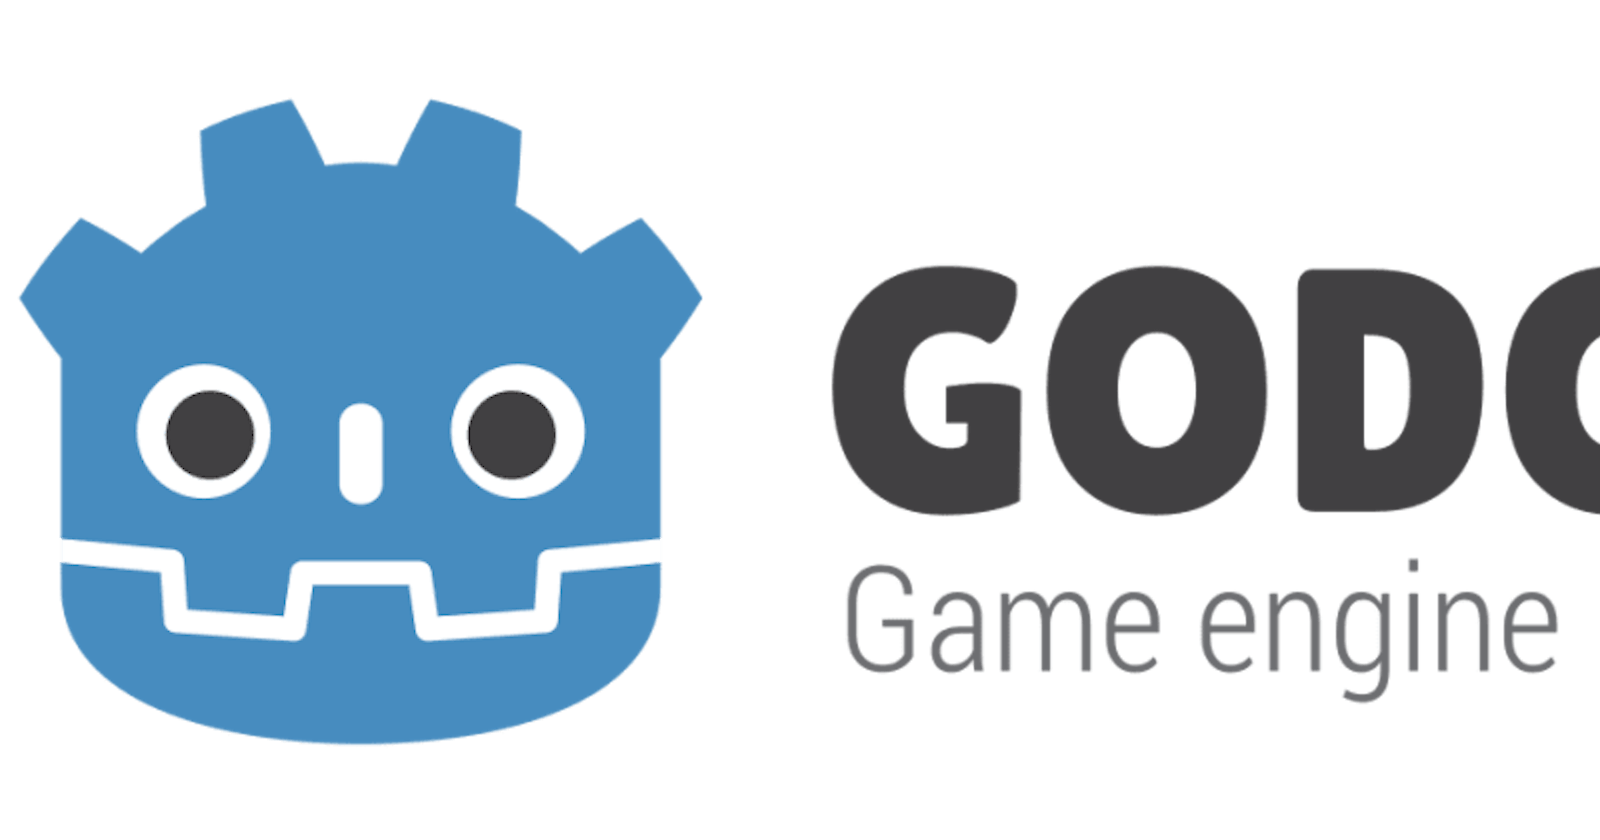 5 Reasons to try Godot game engine